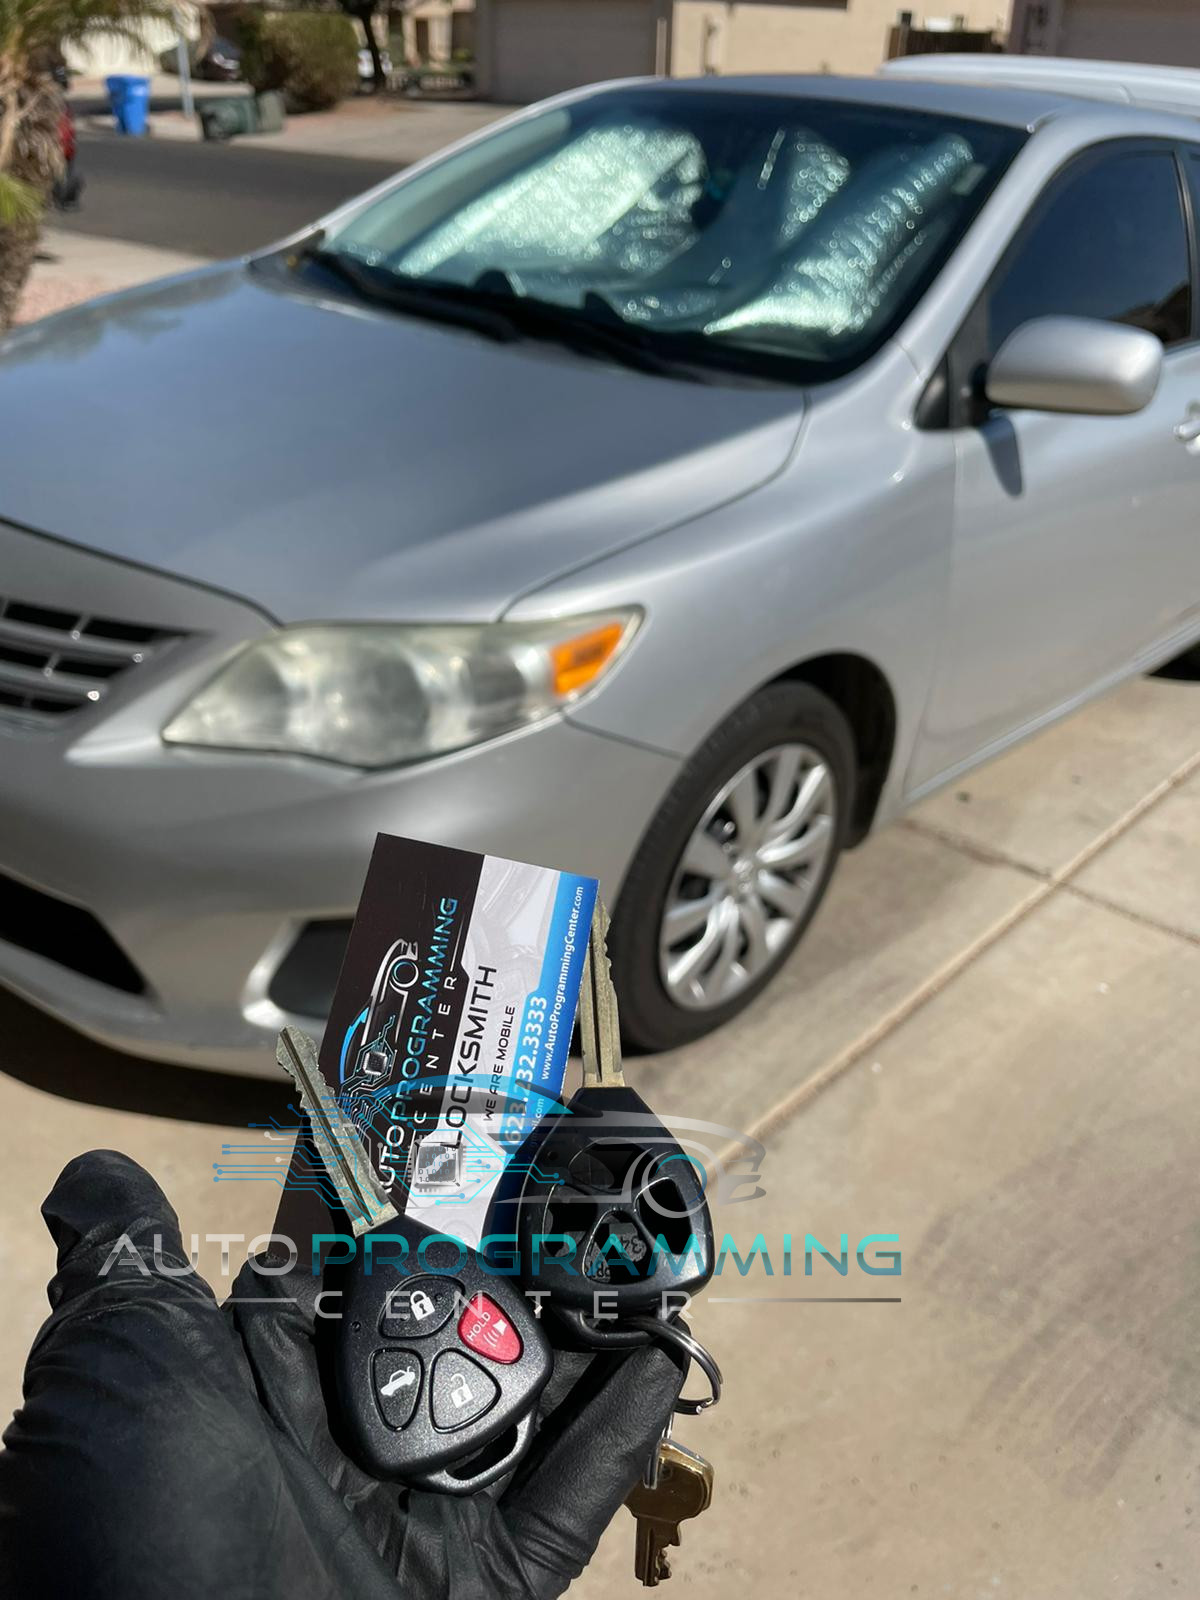 High-resolution image showcasing an automotive locksmith providing Subaru key replacement services for enhanced security and peace of mind.